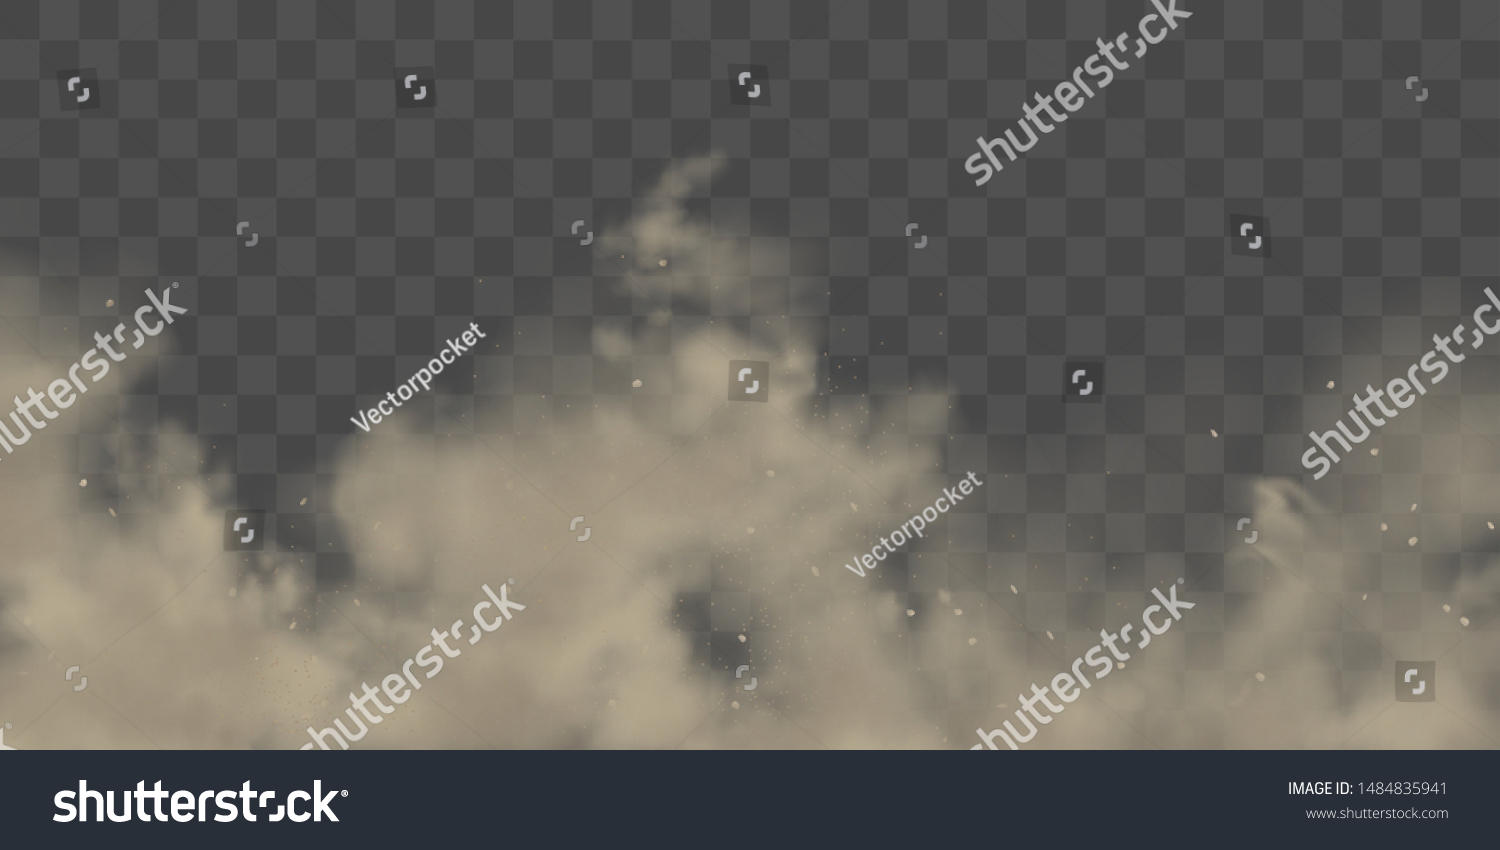 Road dust cloud with dirt or soil particles, brown color powder splash frozen motion 3d realistic vector illustration isolated on transparent background. City smog, dirty smoke texture. Air pollution #1484835941